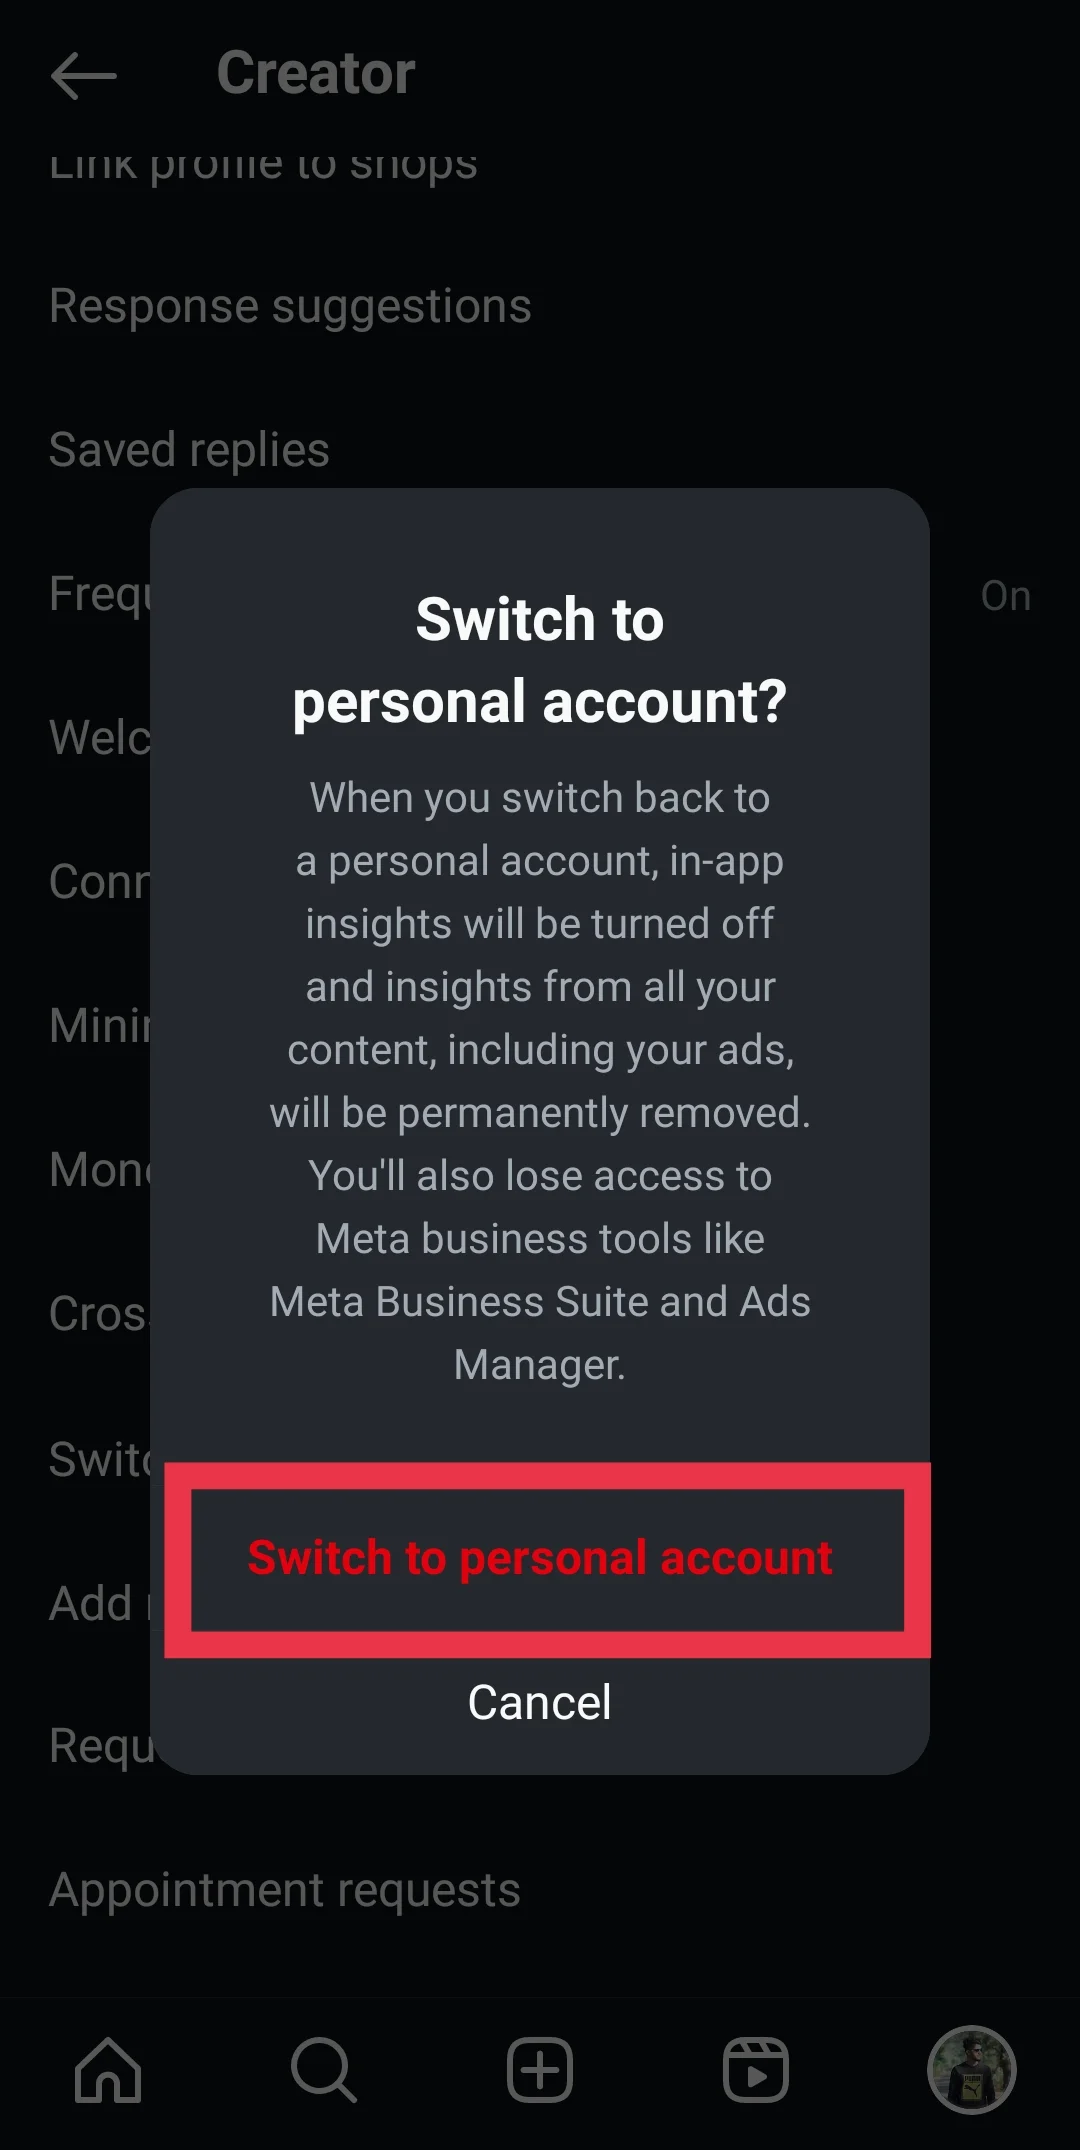 Switch to personal account confirmation